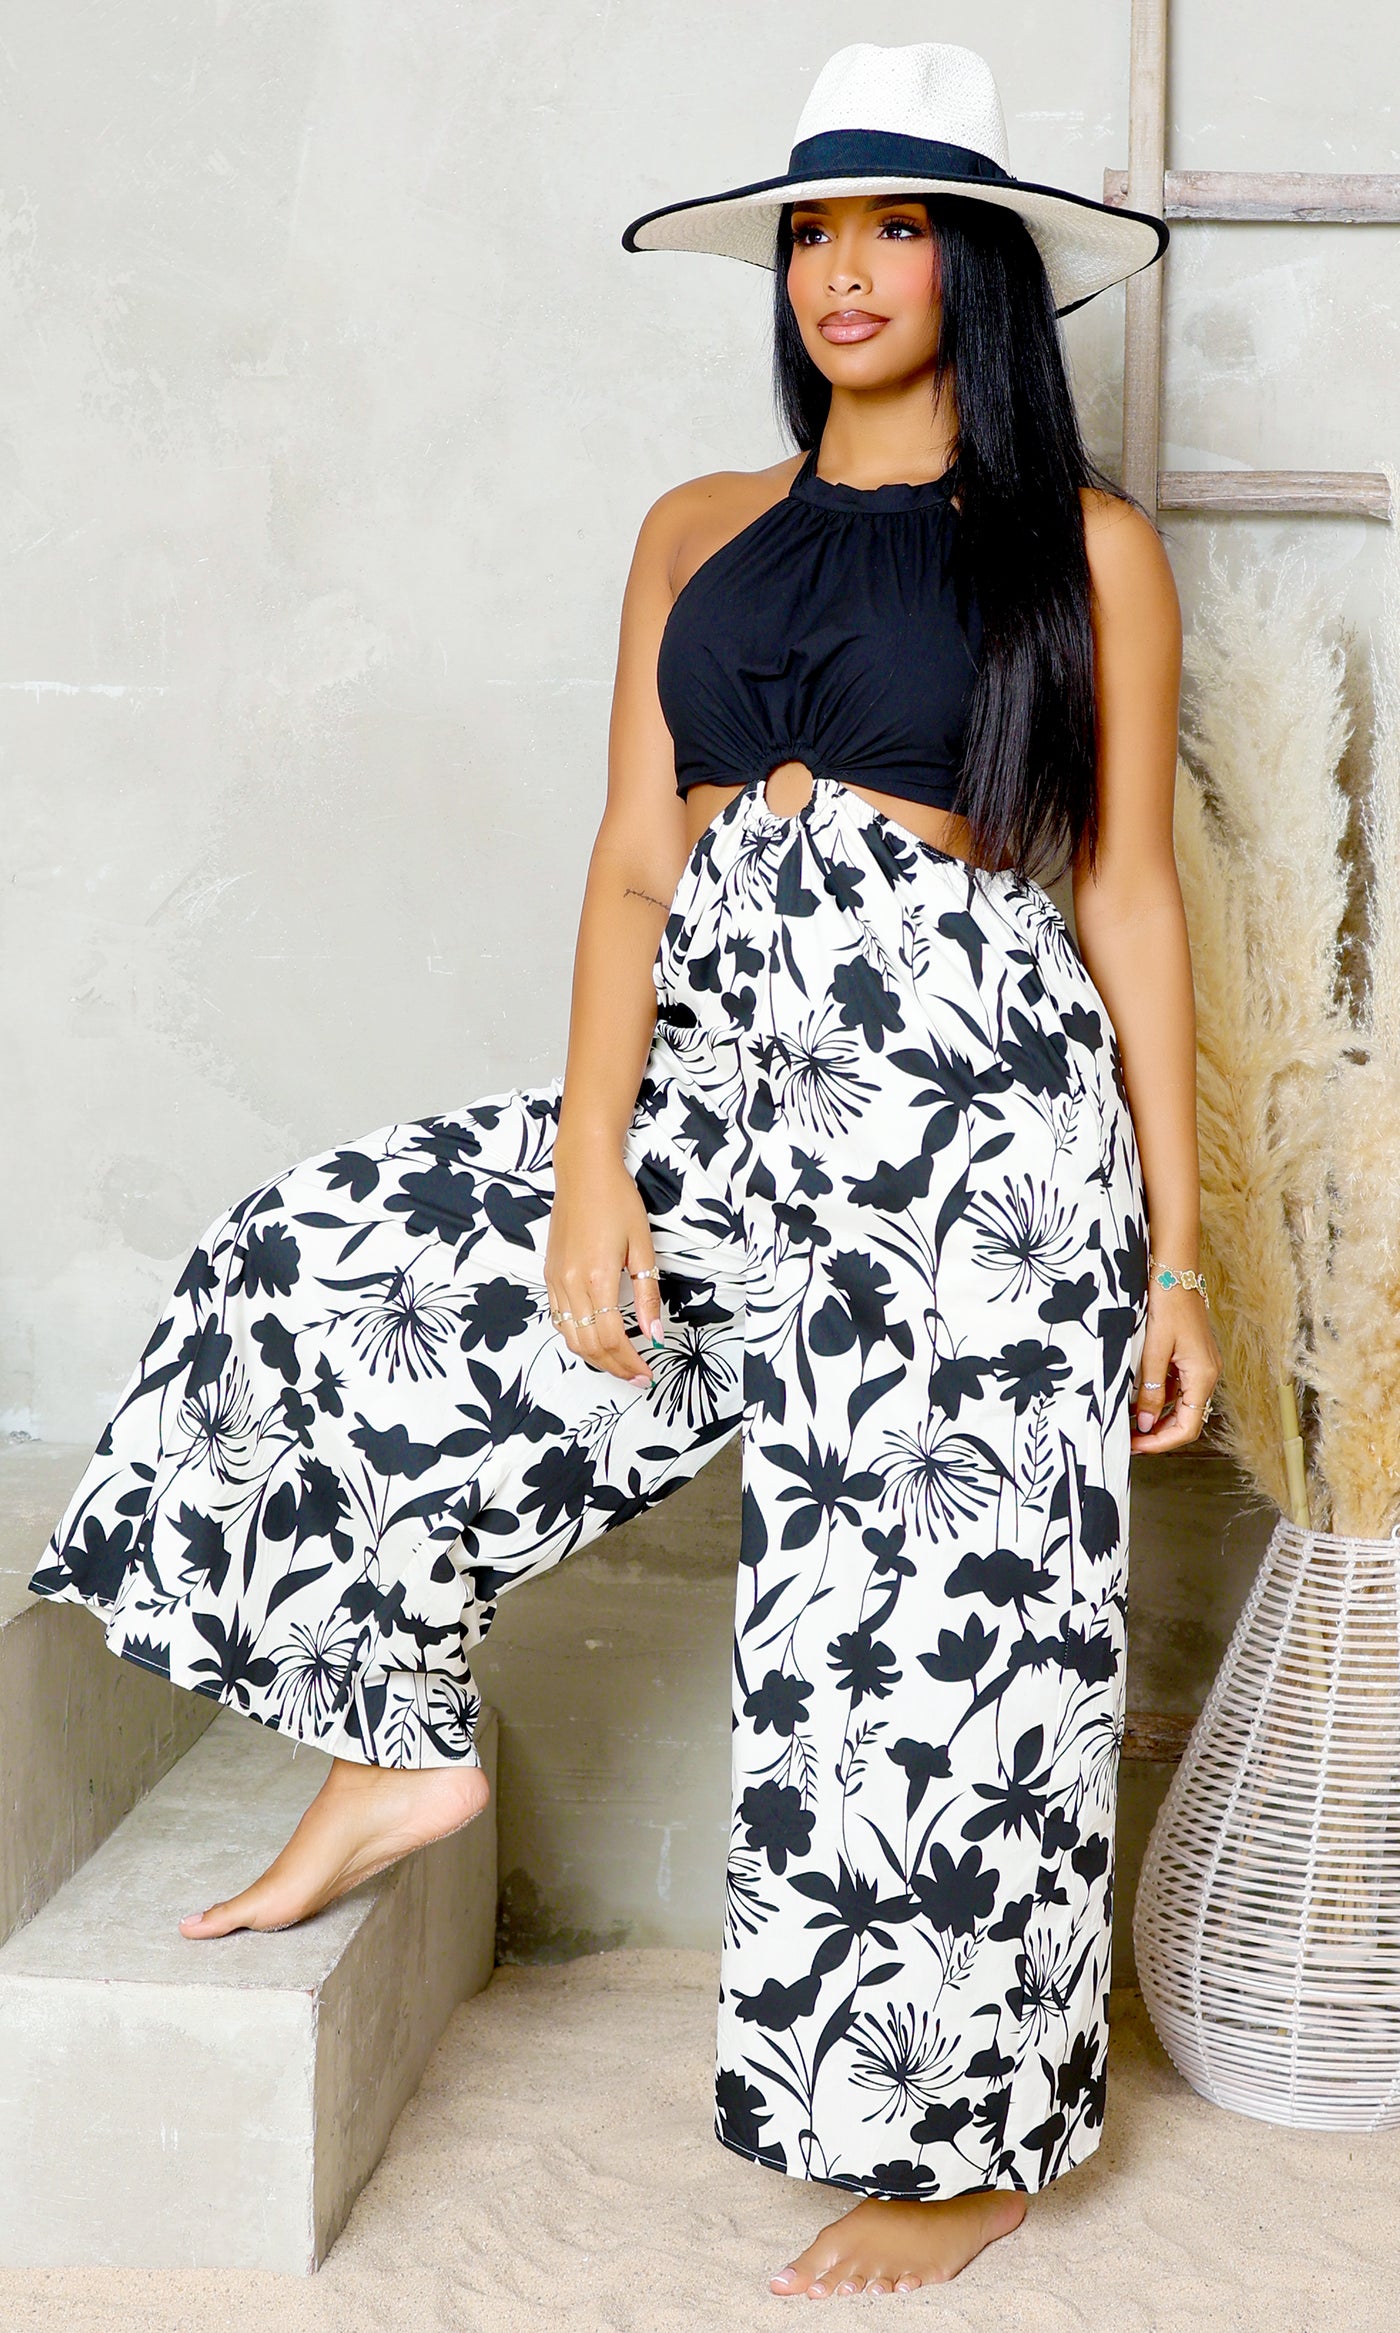 Blooming Garden Cutout Jumpsuit - Black - Cutely Covered